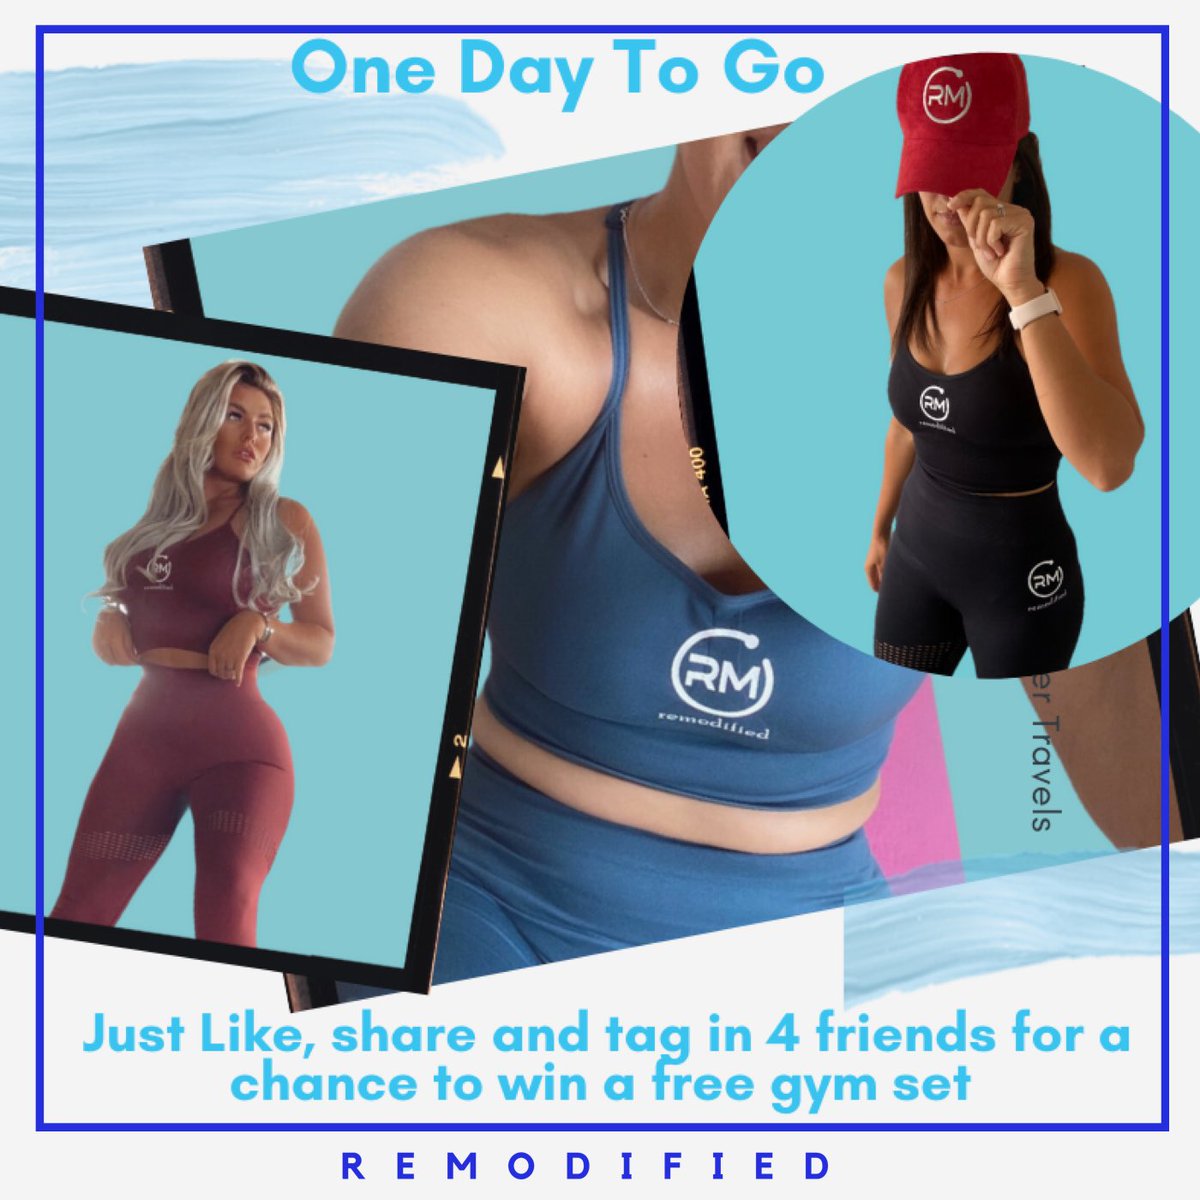 💥Competition 💥
•
•
🚨Final Day To Enter 🚨
•
•
You Just Need to - Like - Retweet - & Tag in 4 Friends to be in with a chance to win a ReModified Gym Set 
#rm #gym #life #gymstyle #gymmotivation #gymclothes #competition #free #set #tag #four #friends #gottobeinittowinit